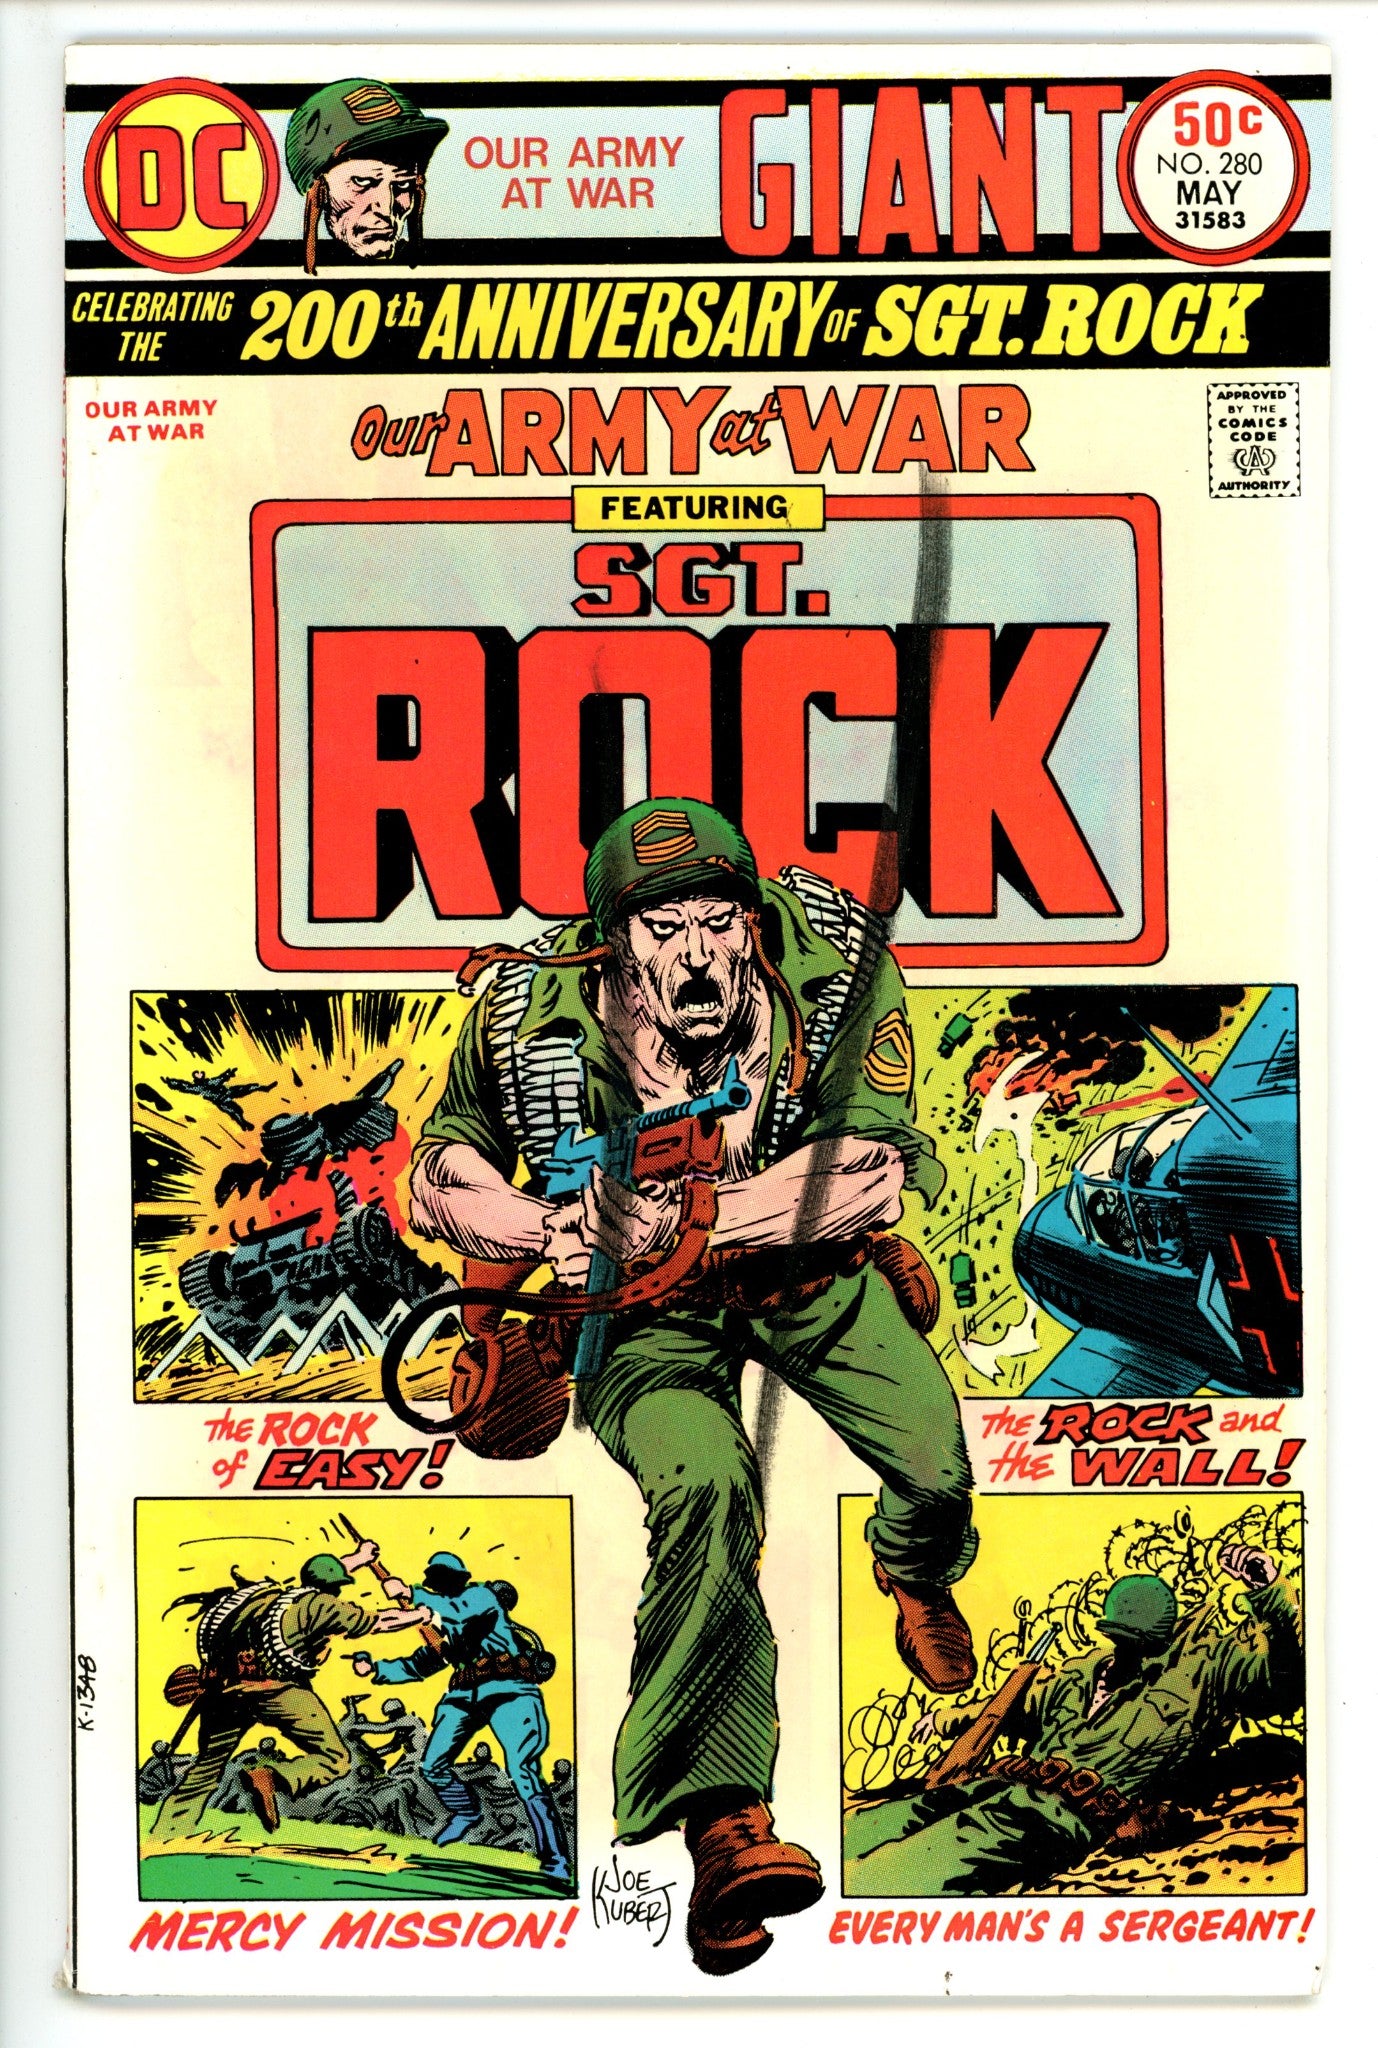 Our Army at War Vol 1 280 FN- (5.5) (1975) 